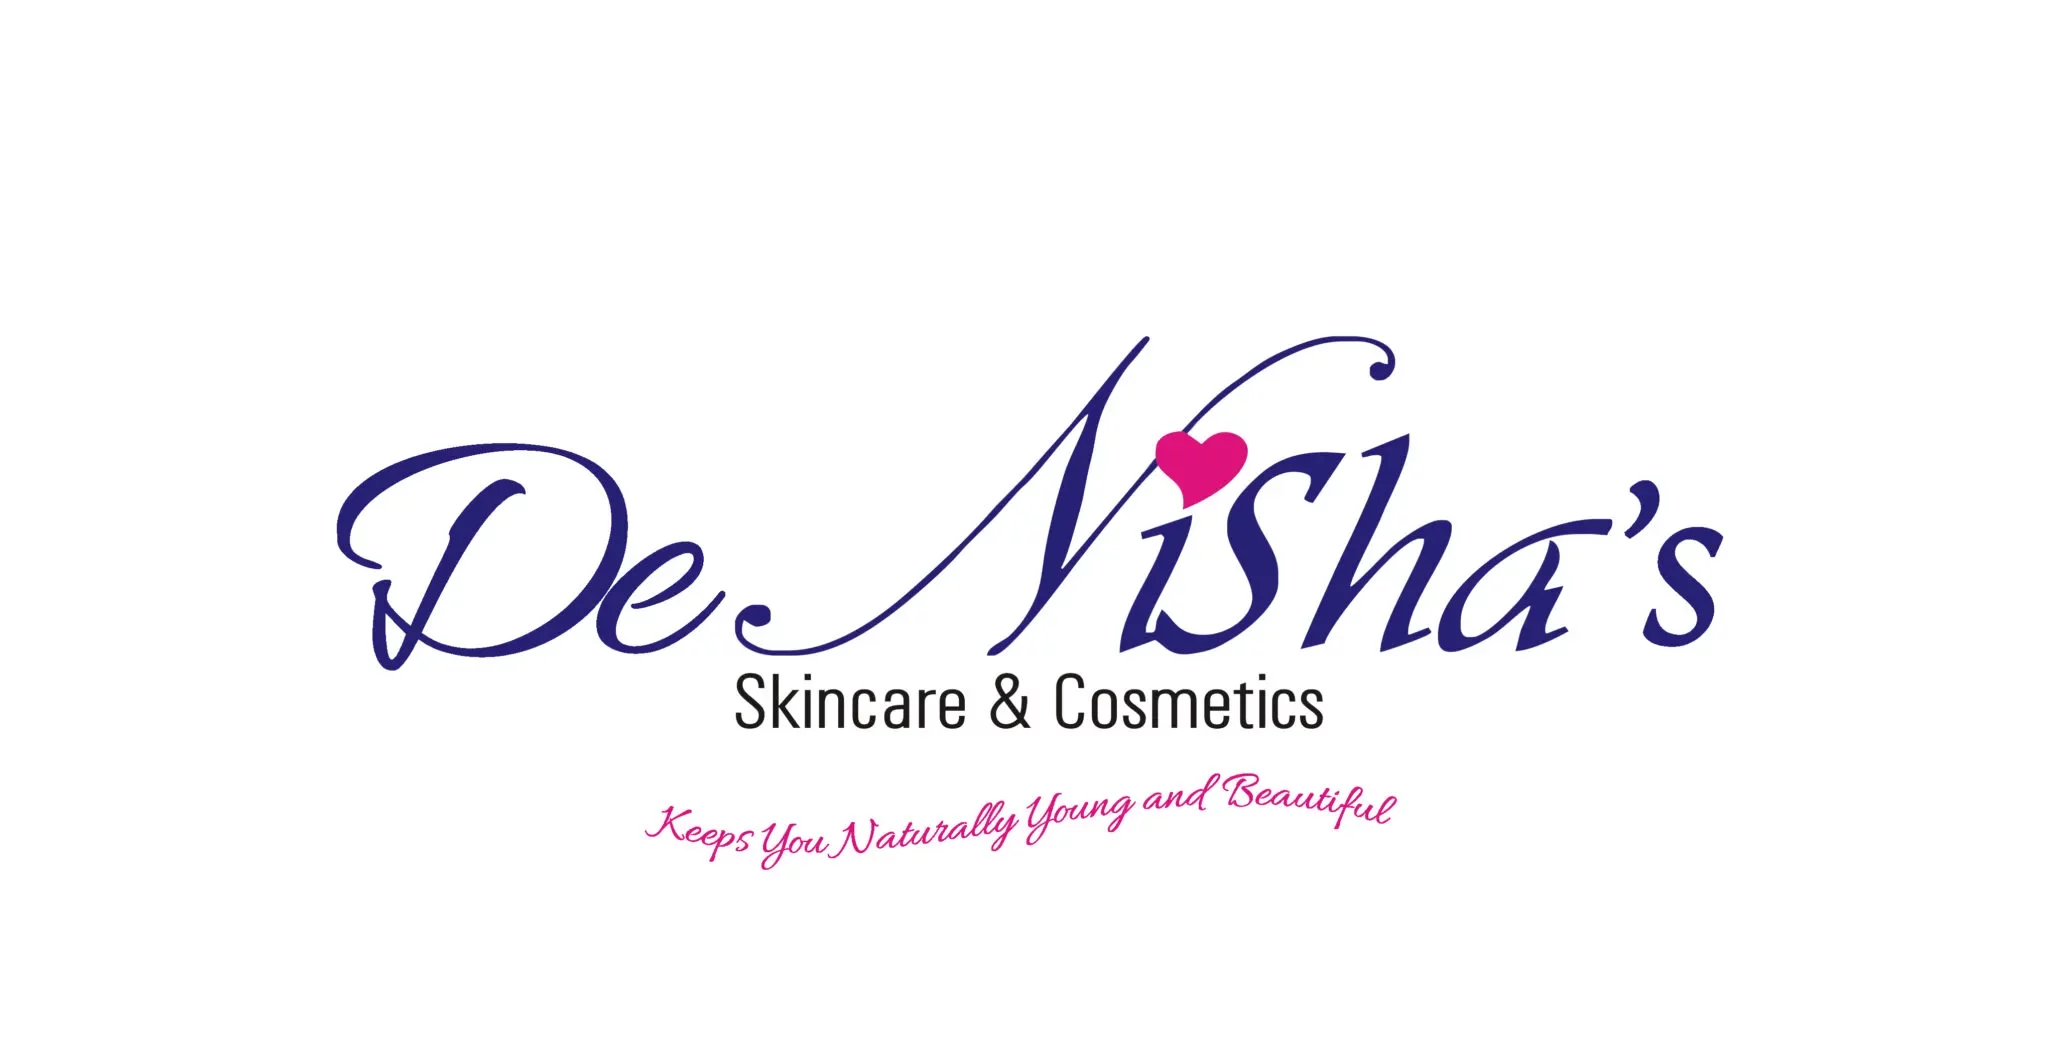 Do Nhe

Skincare & Cosmetics

Keeps You Naturally Young and Beautif,
2 Z (2